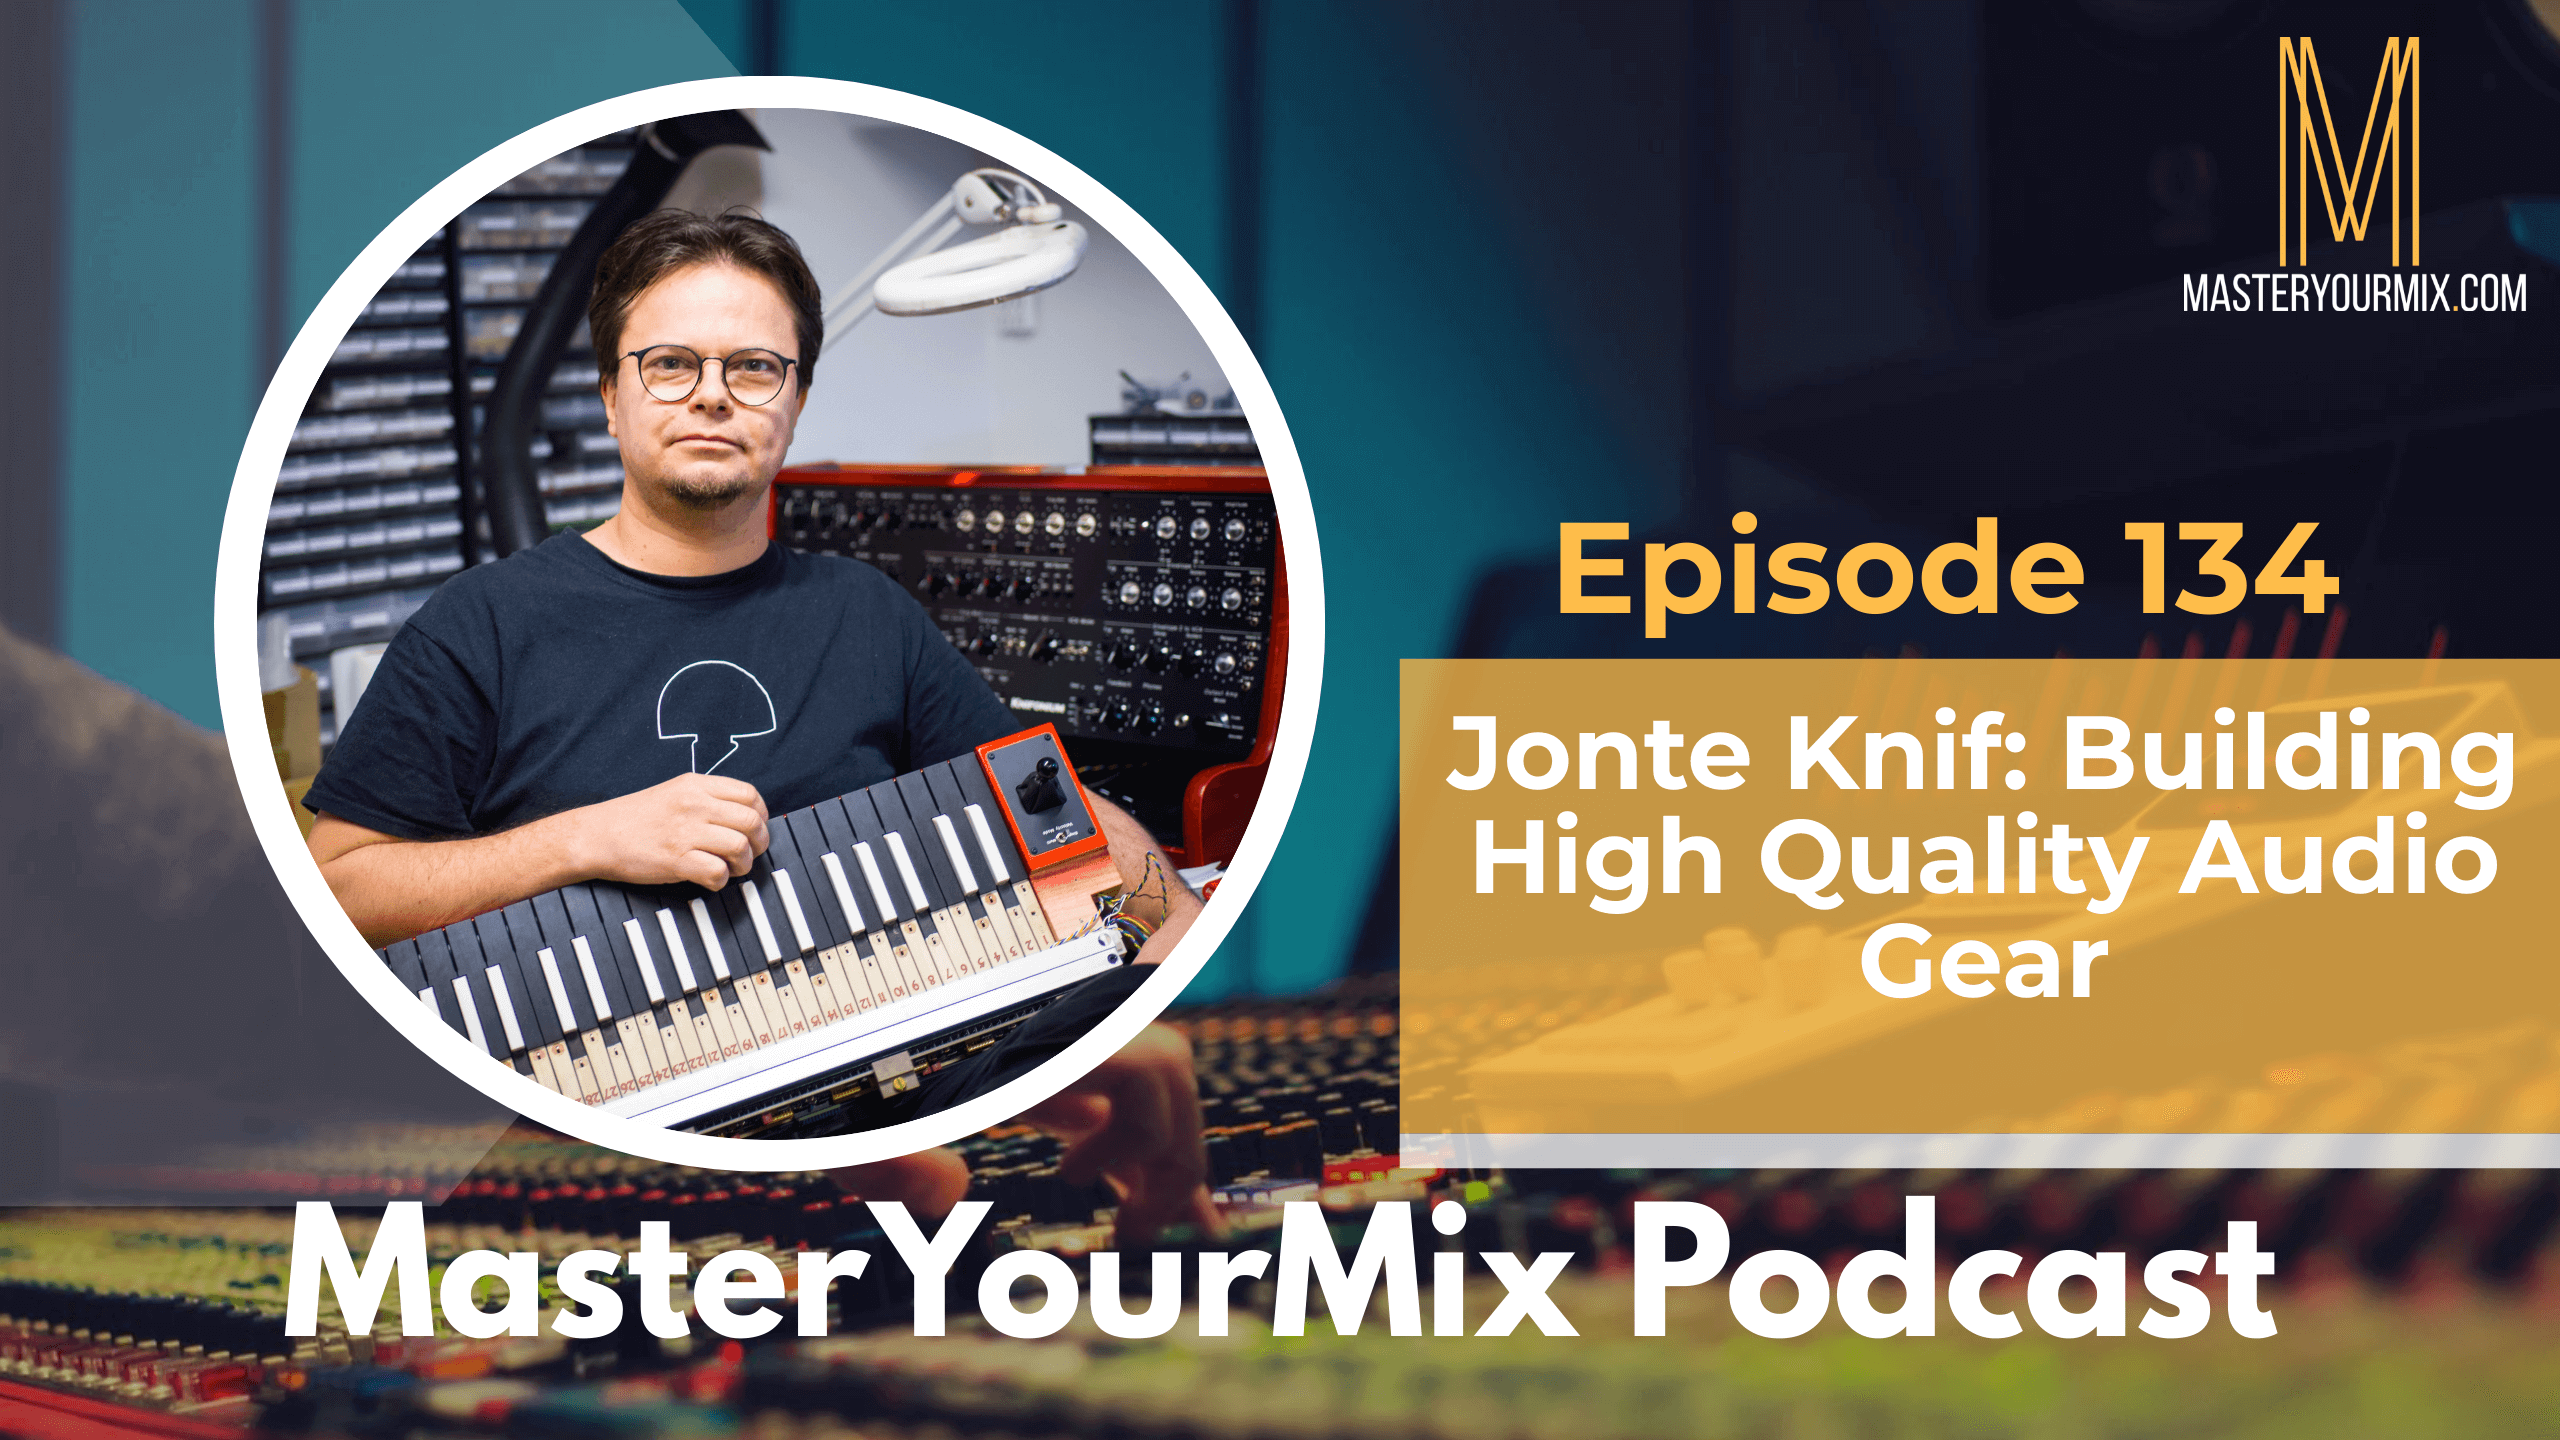 master your mix podcast, ep 134 jonte knif